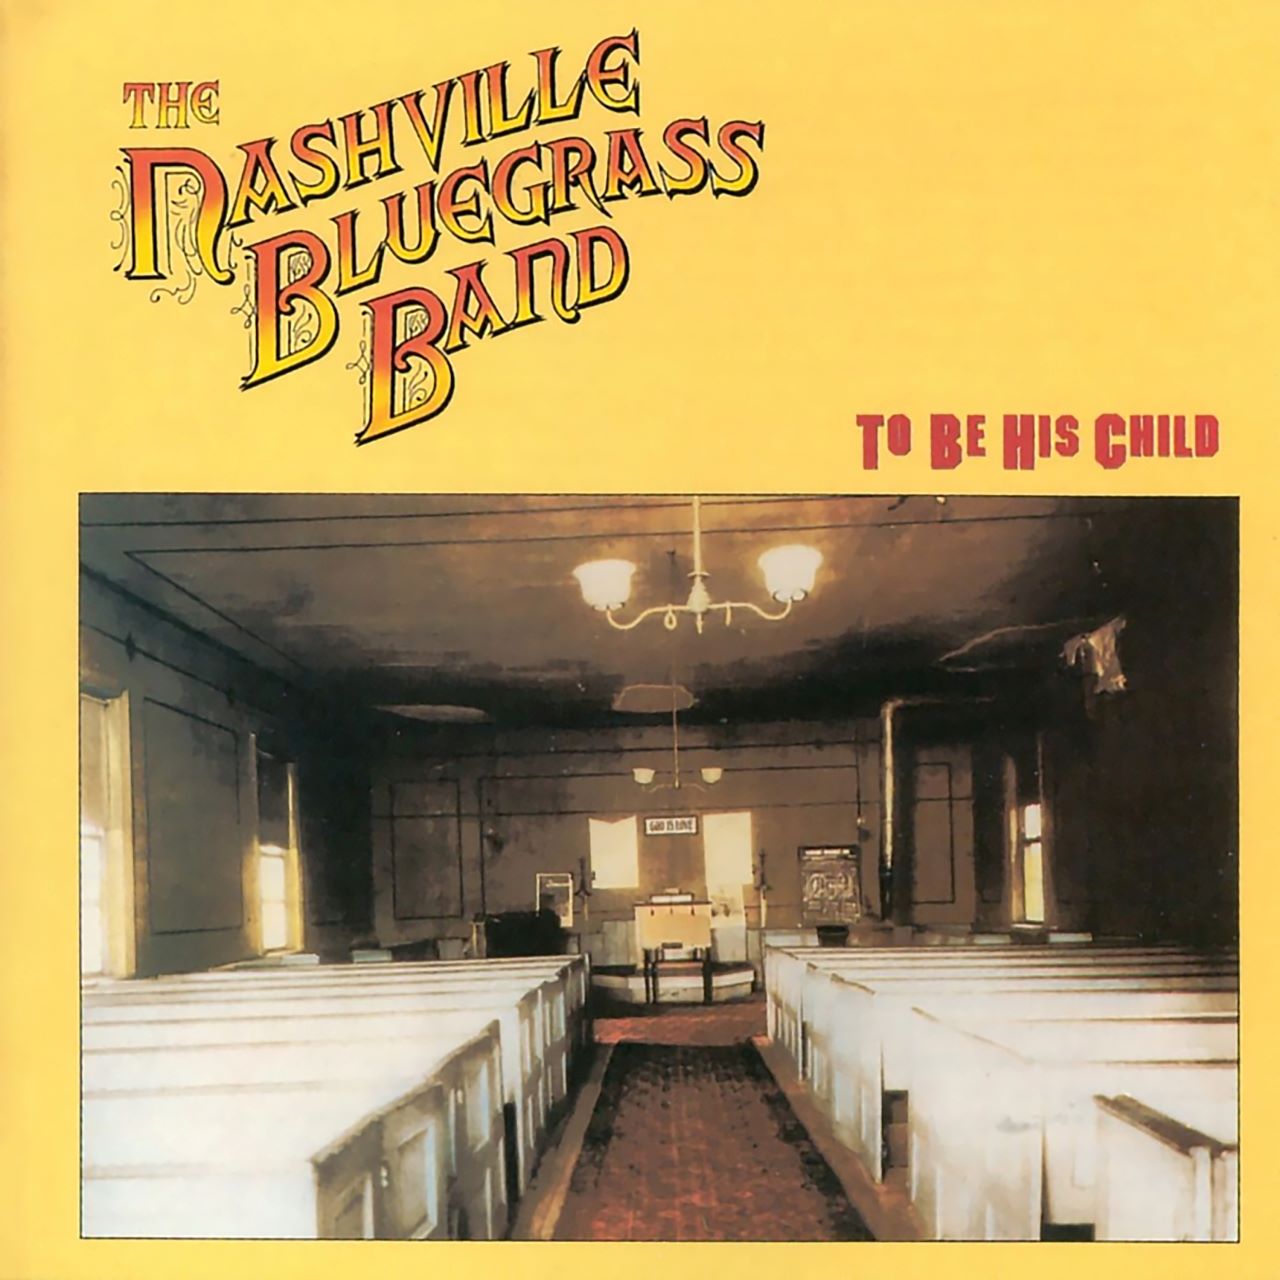 Nashville Bluegrass Band - To Be His Child cover album